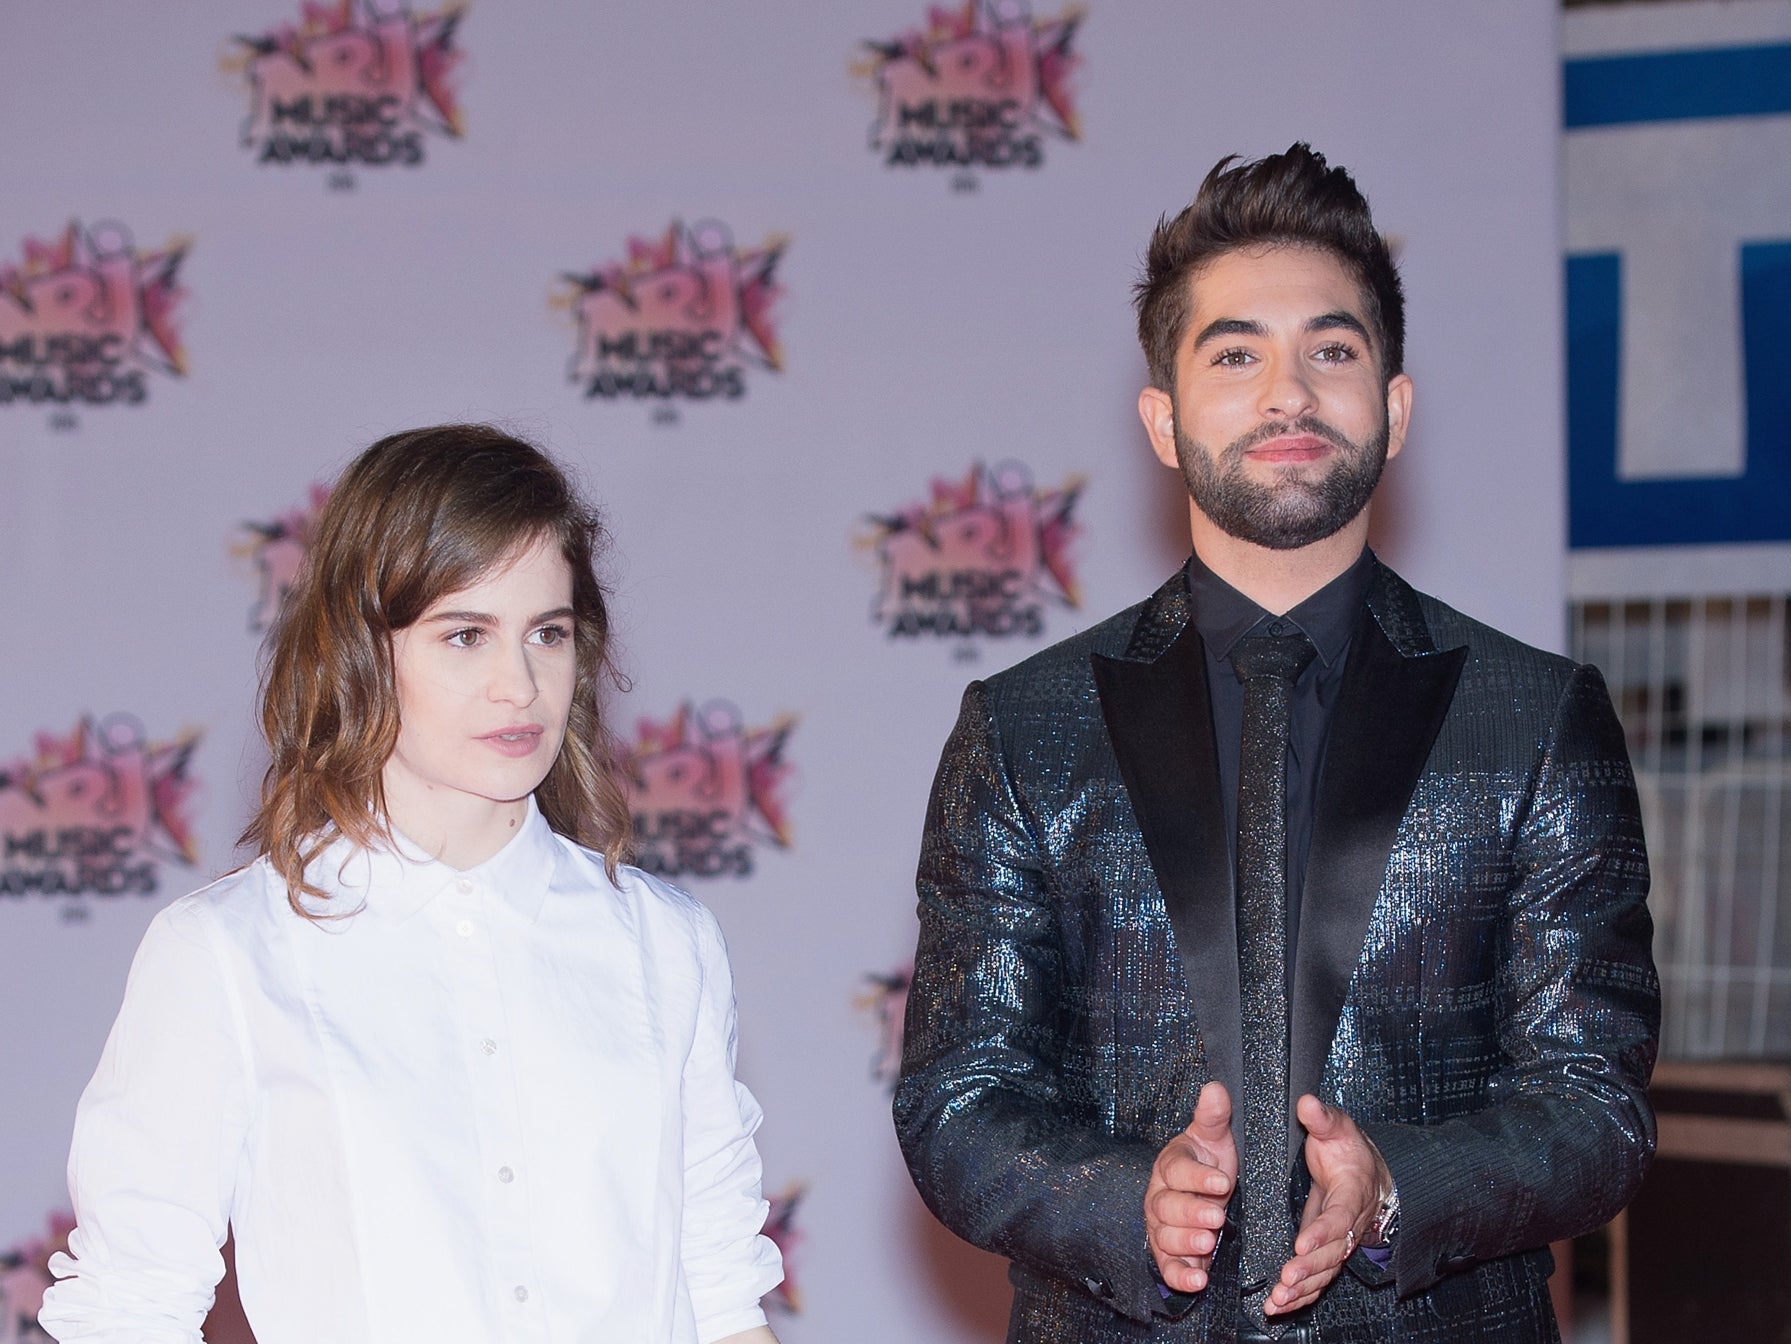 Kendji Girac with Christine and the Queens at the NRJ Music Awards in 2015